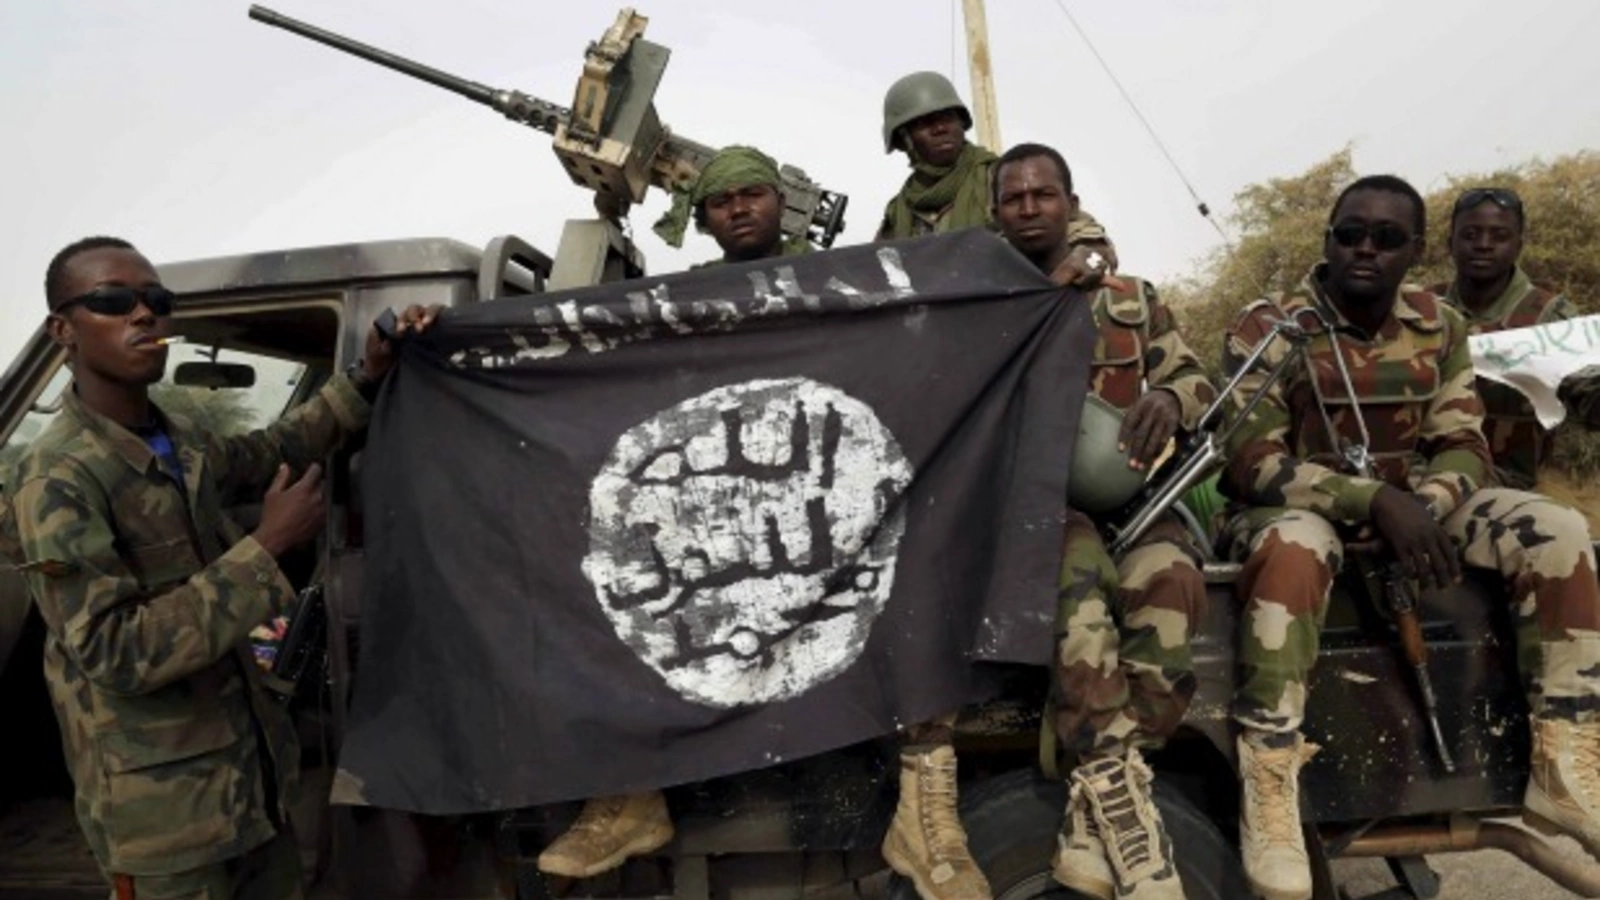 Boko Haram's Factional Feud | Council on Foreign Relations